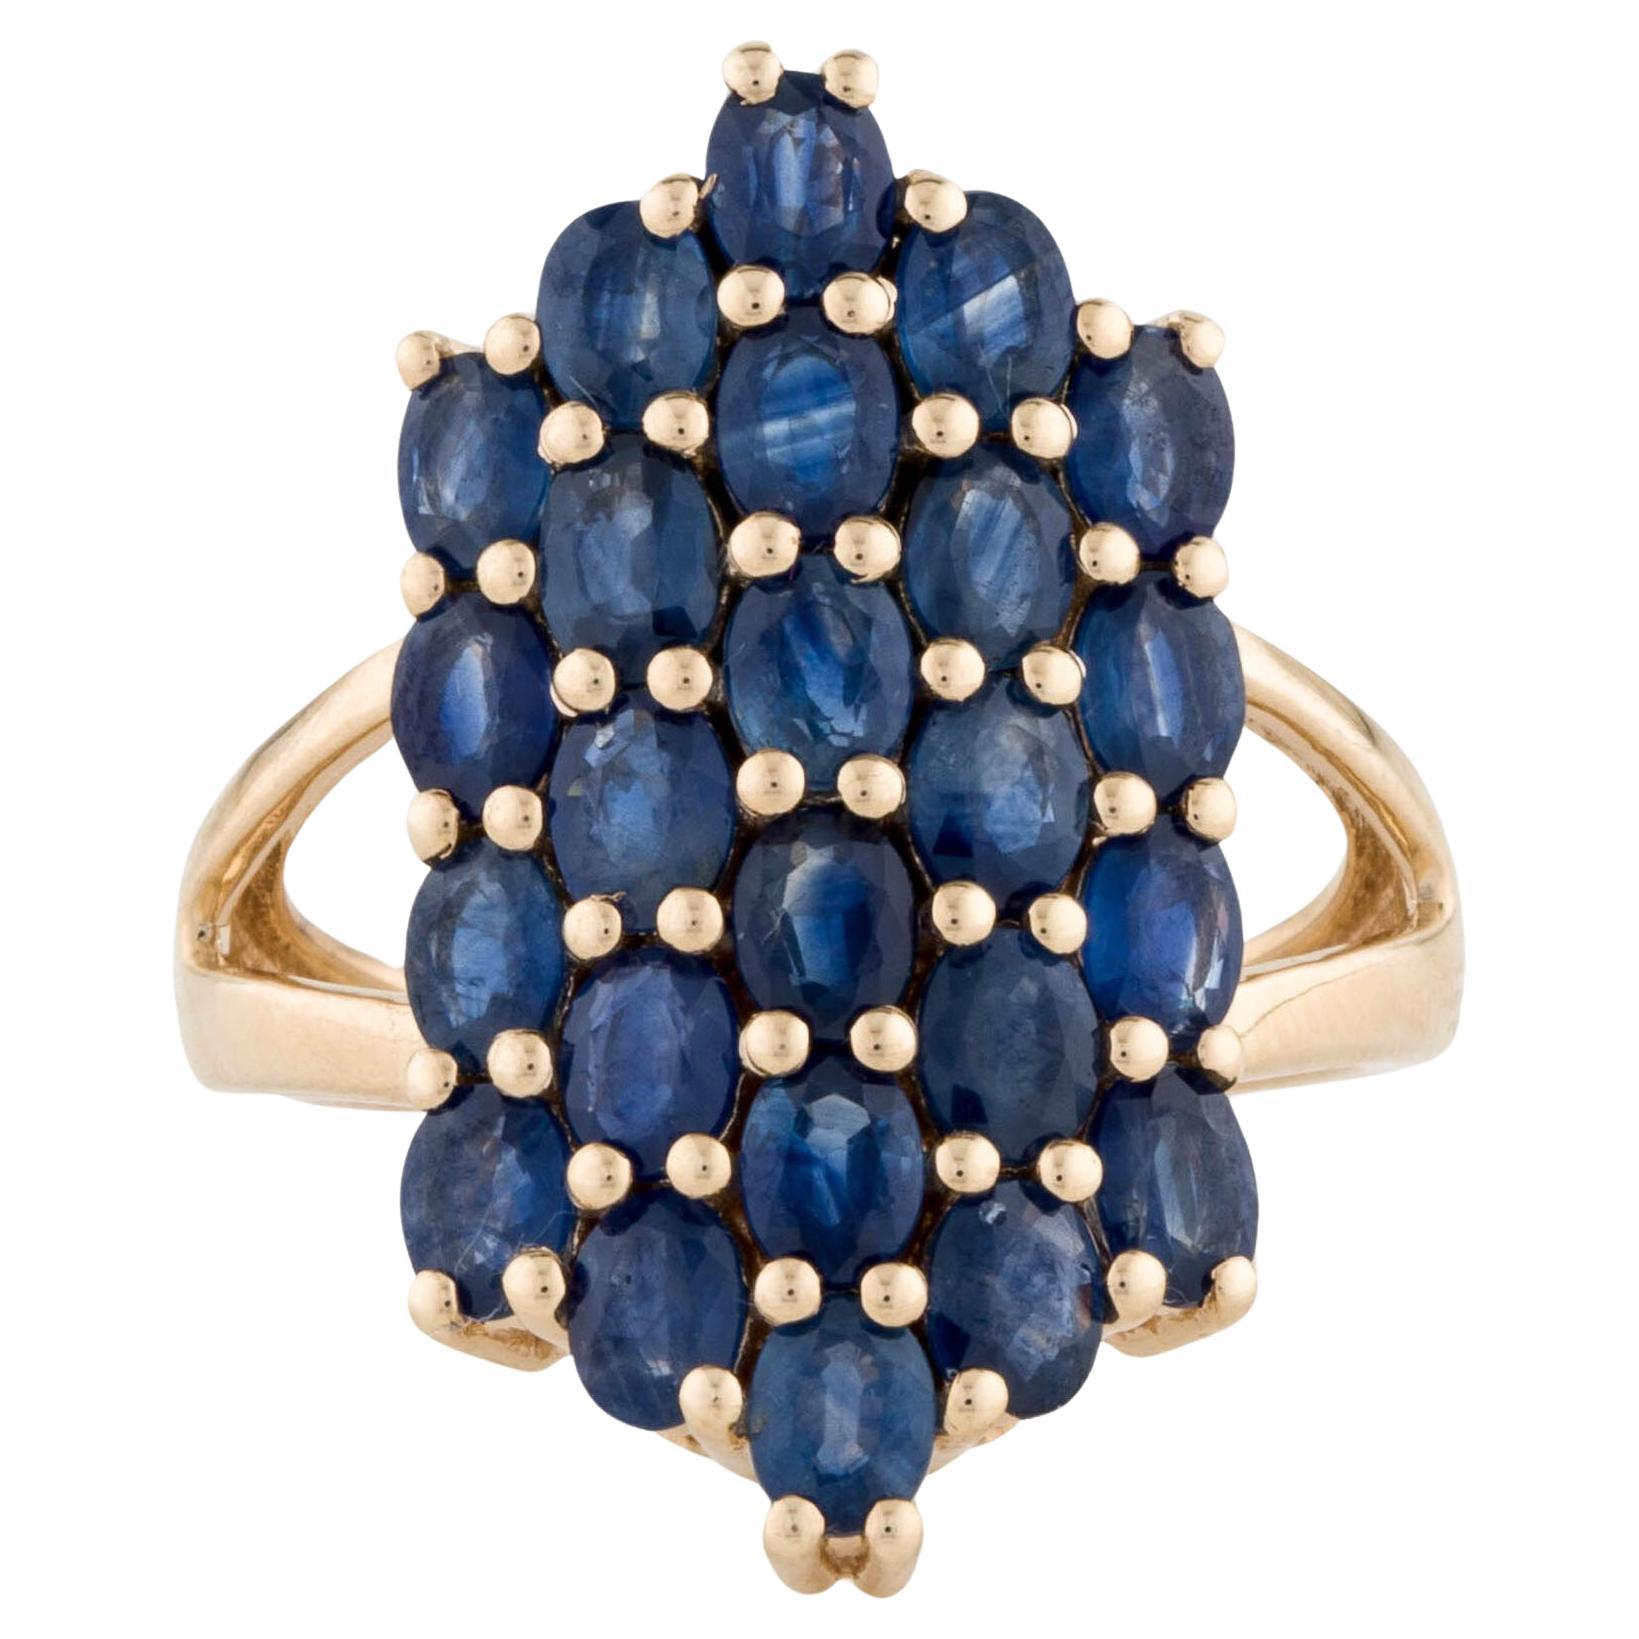 Luxurious 14K Sapphire Cocktail Ring, 4.81ctw, Size 6.75 - Statement Jewelry